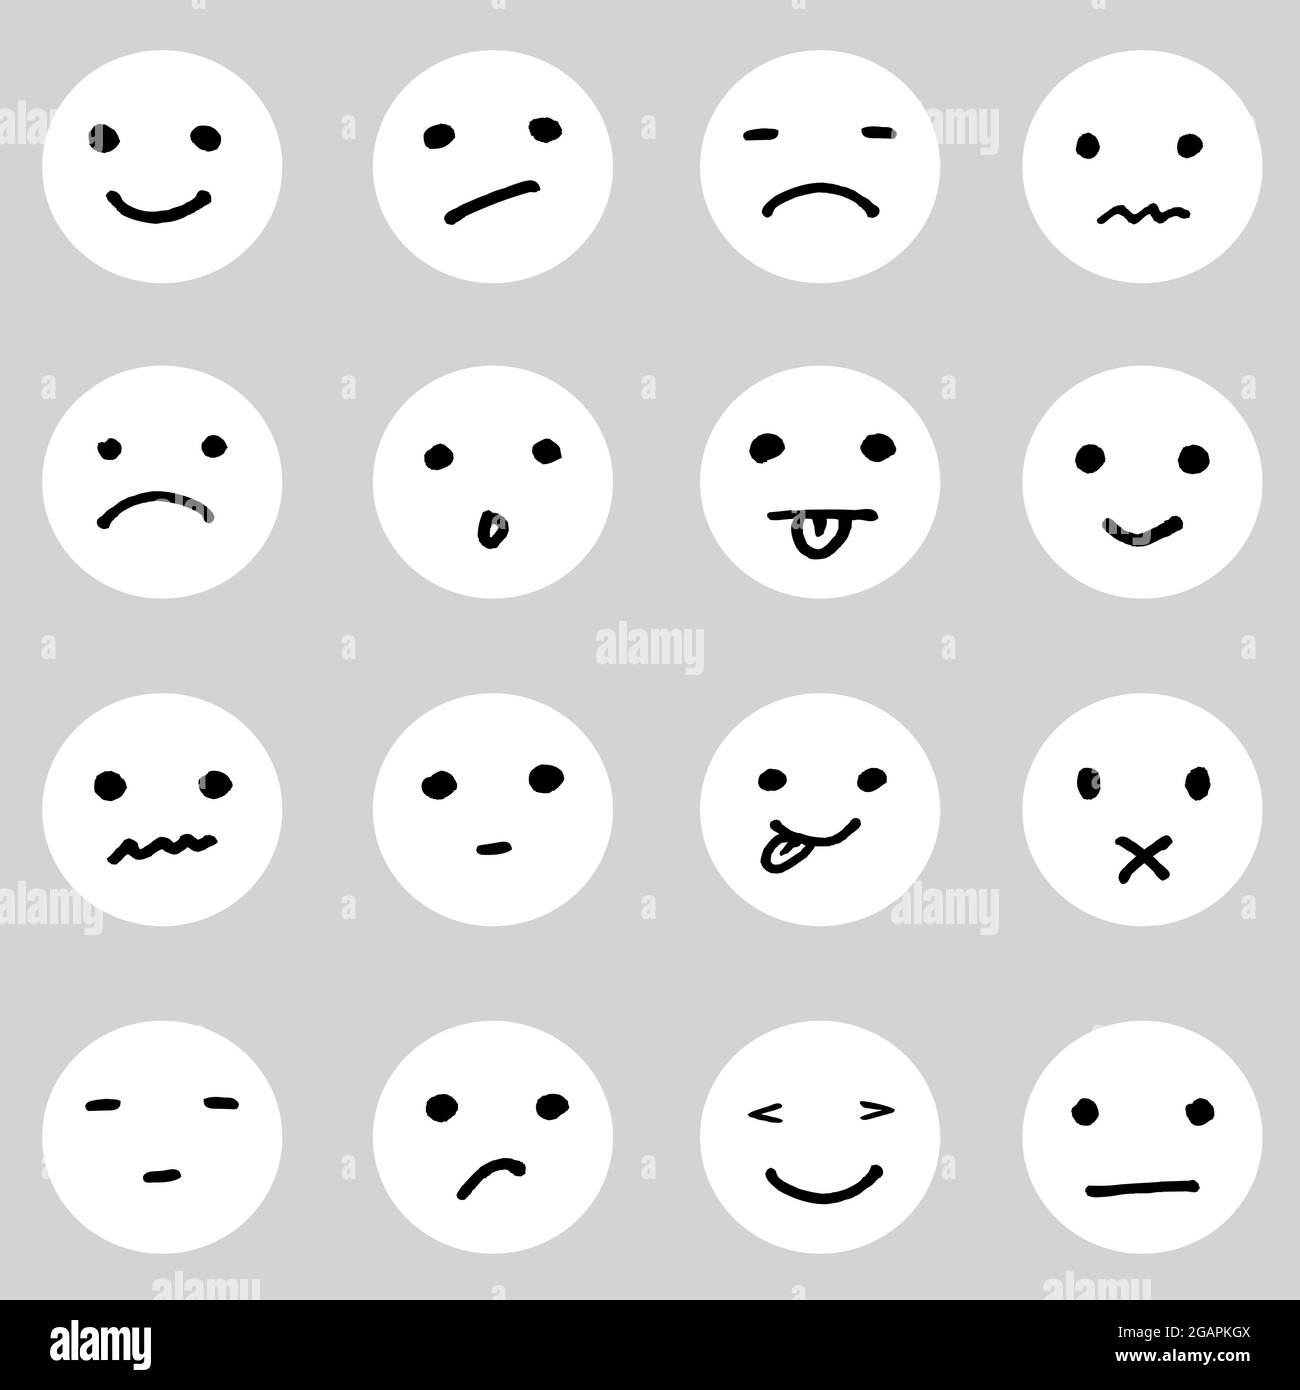 Set of doodled cartoon faces in a variety of expressions. Easy editable layered vector illustration. Stock Vector